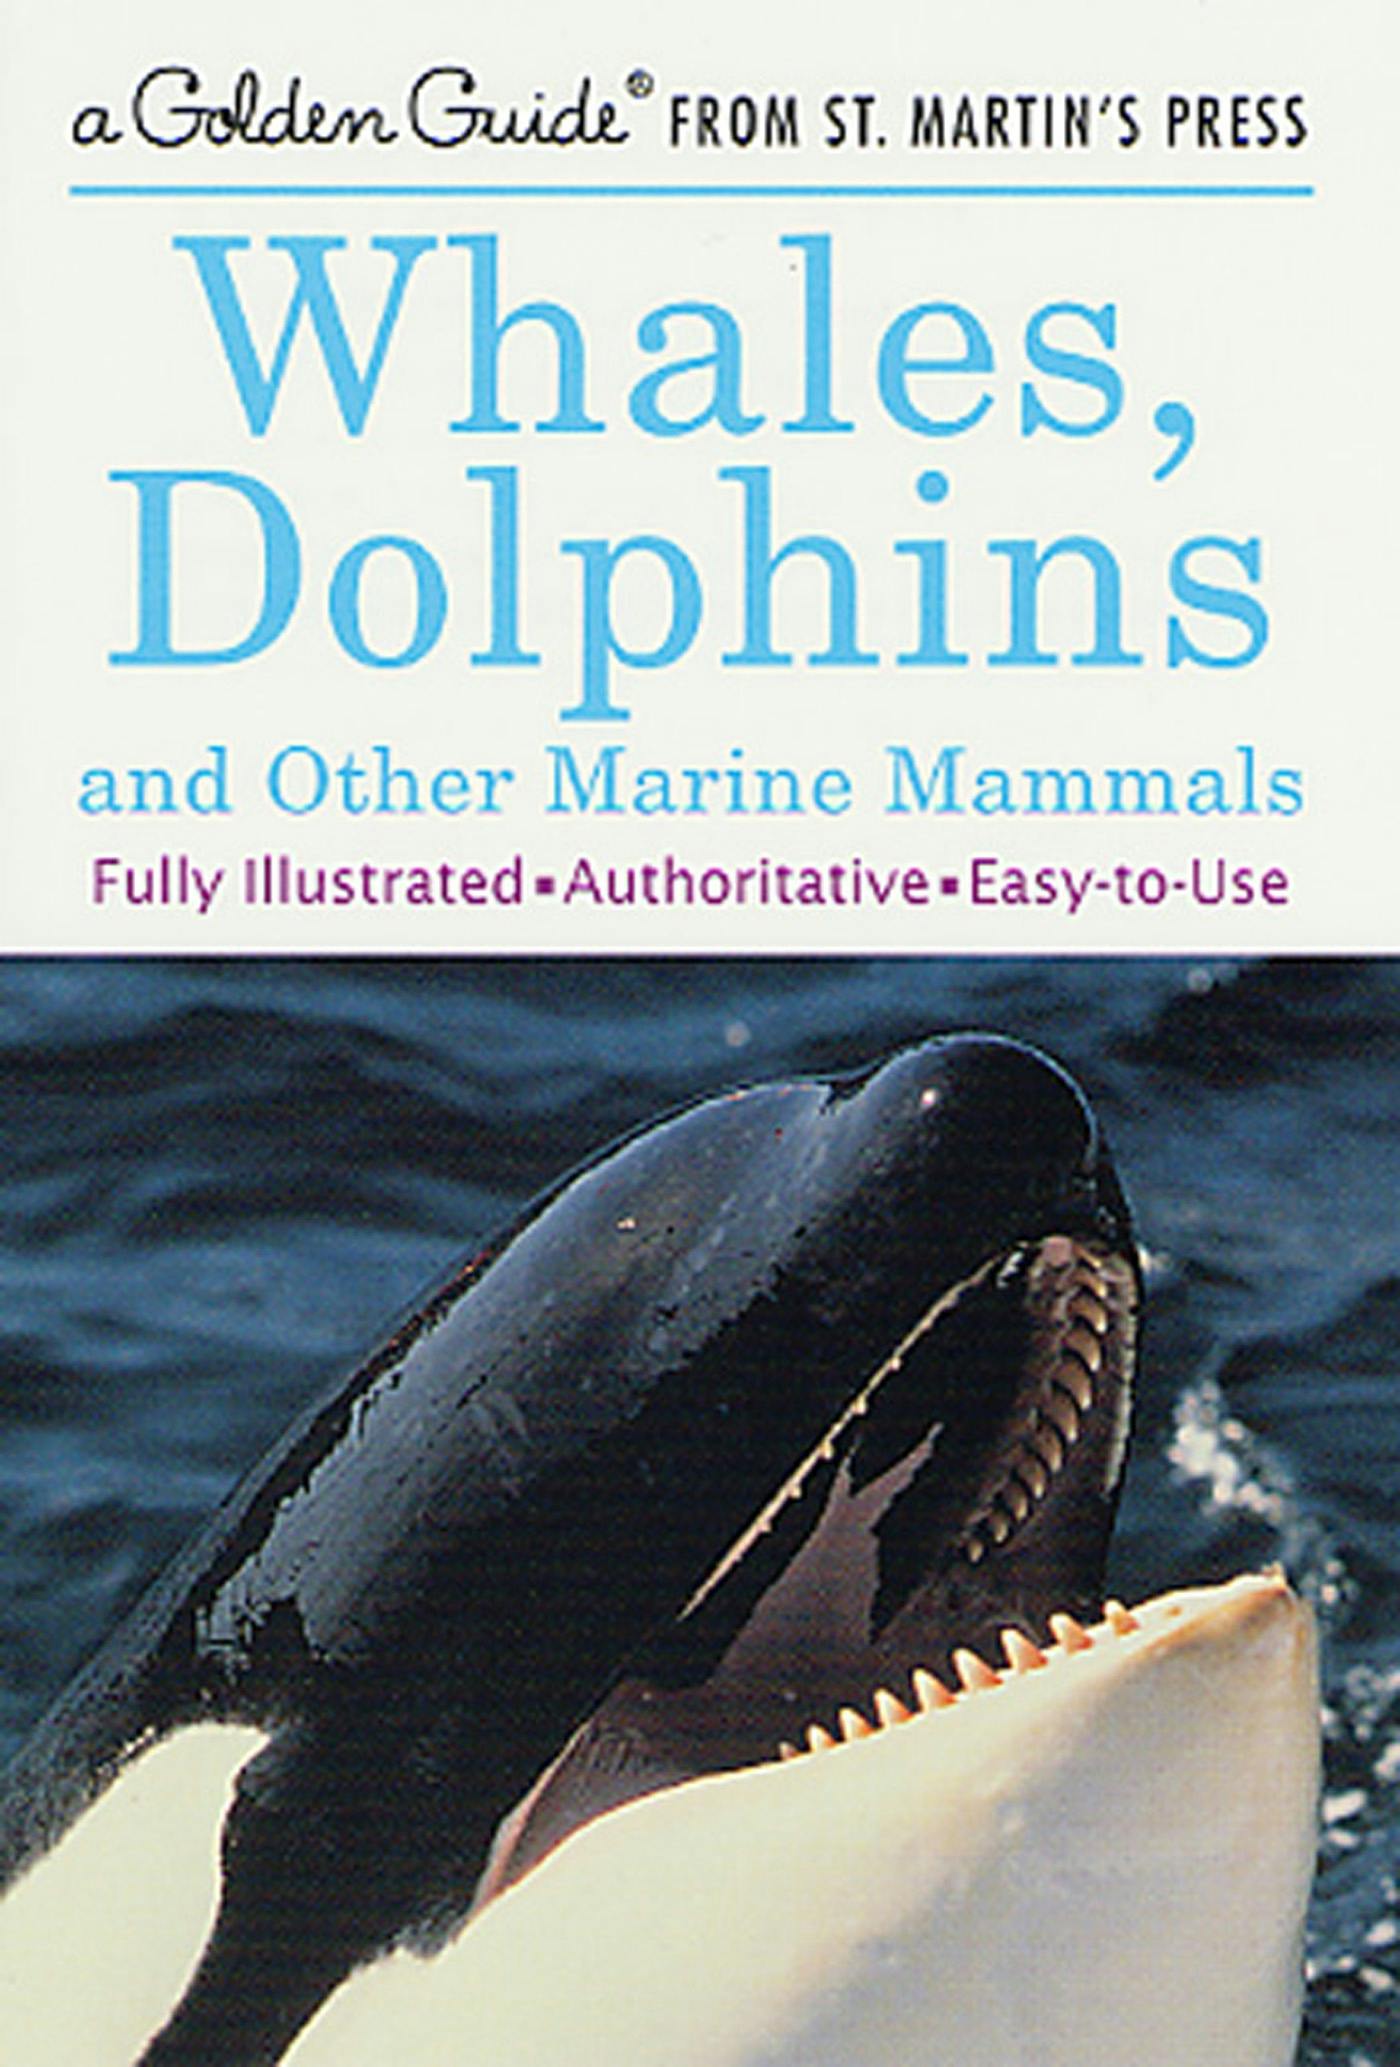 Whales, Dolphins, and Other Marine Mammals